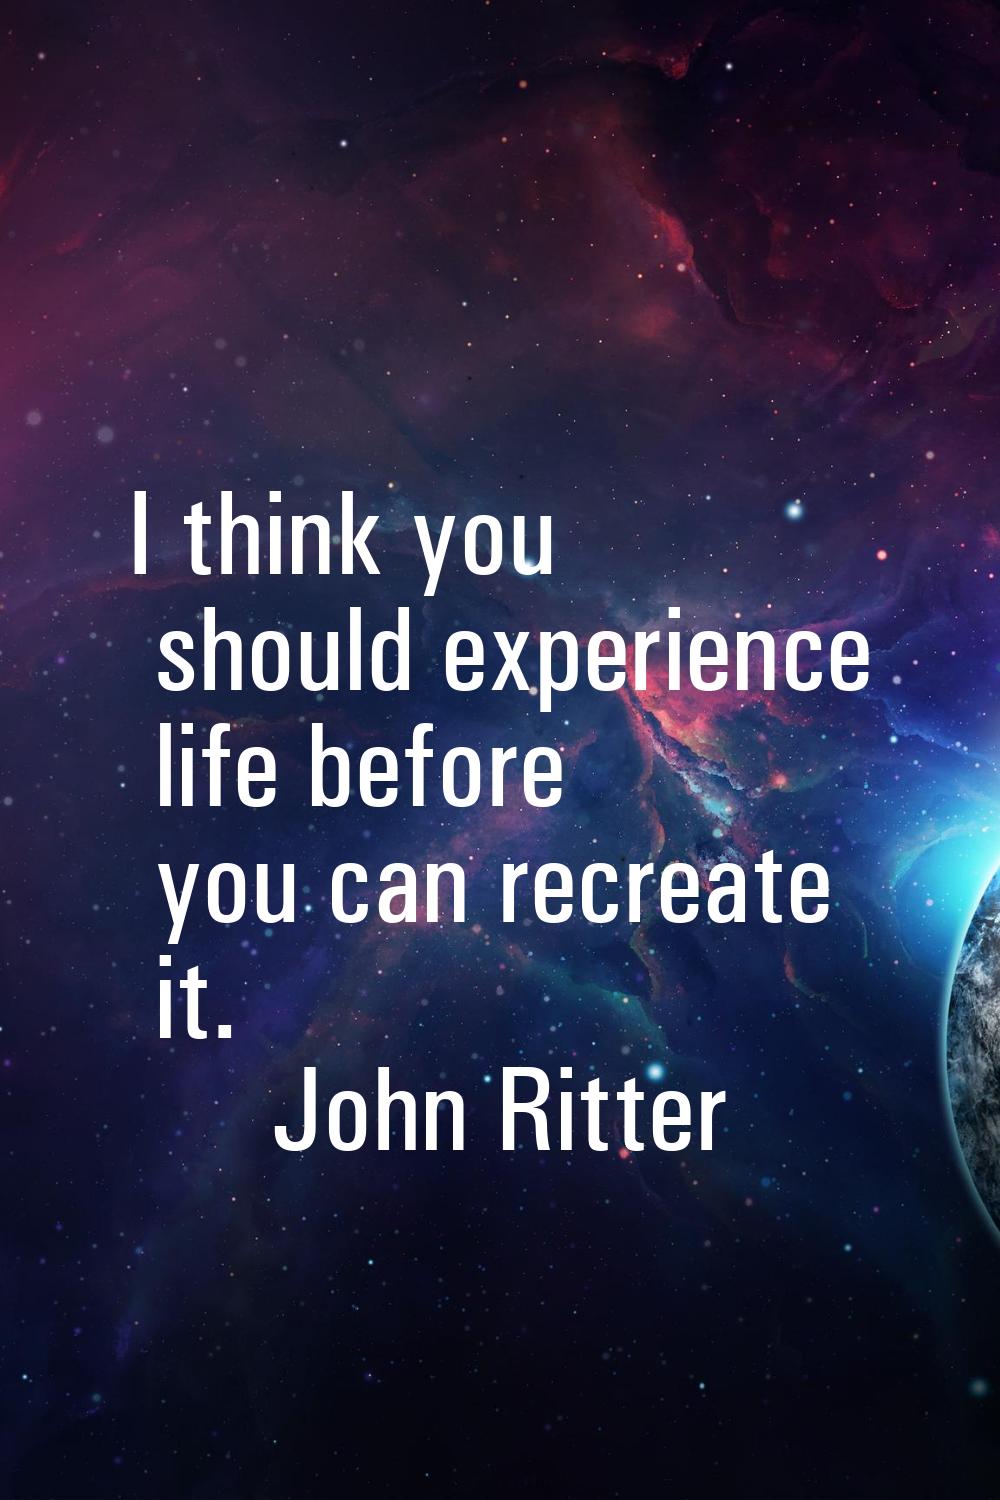 I think you should experience life before you can recreate it.